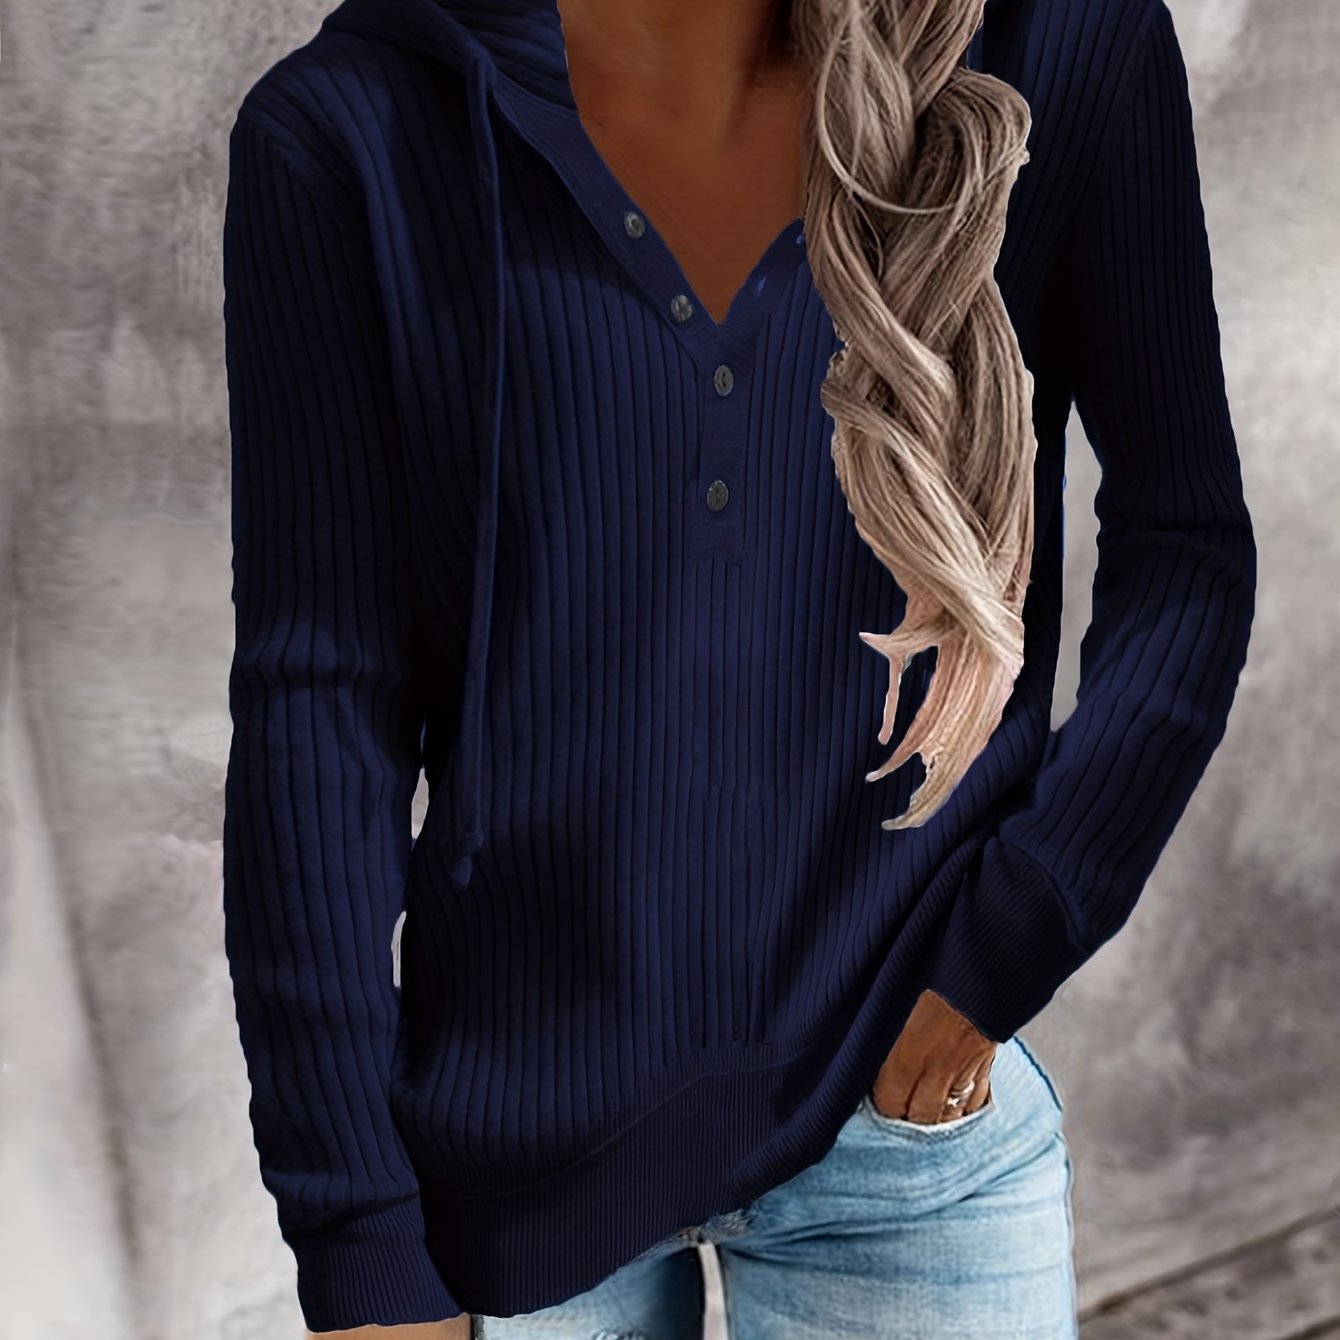 Plus Size Casual Coat, Women's Plus Solid Ribbed Long Sleeve Drawstring Hoodie Button Up Coat Purplish Blue